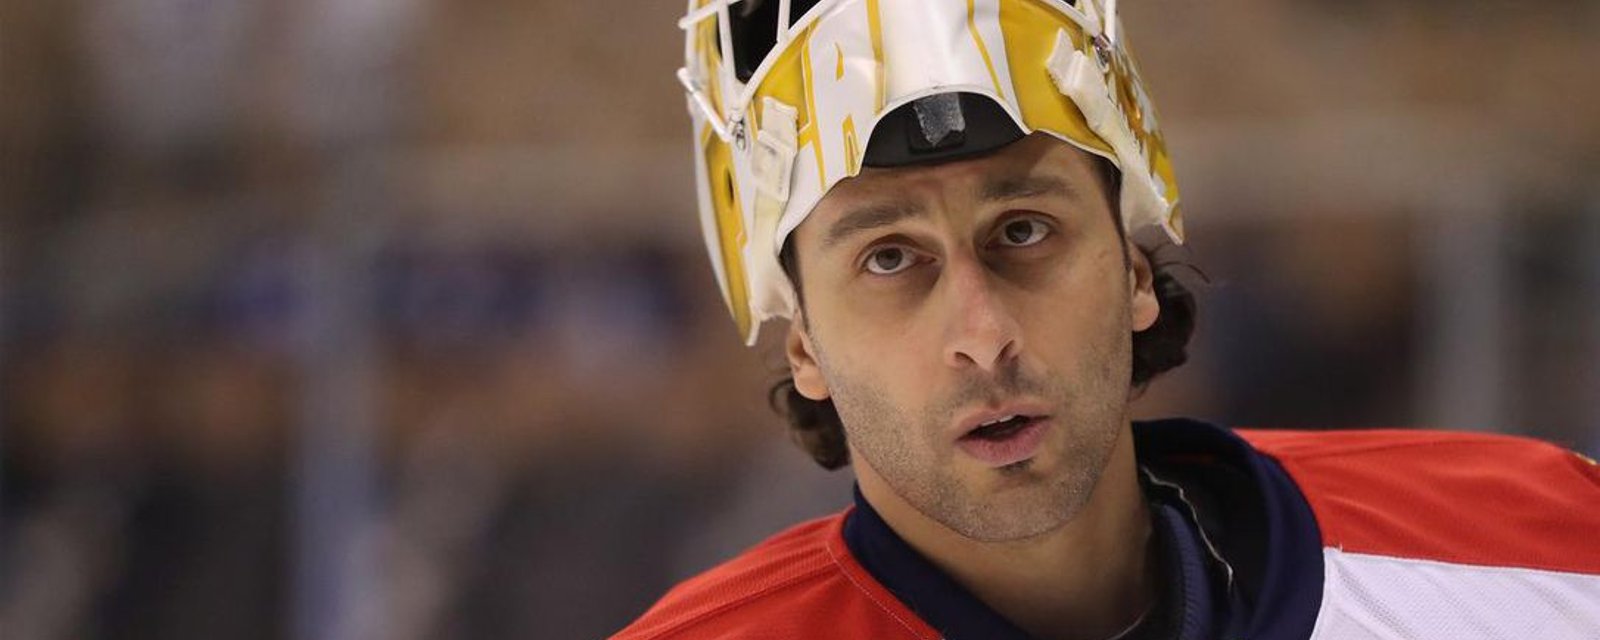 Luongo reacts to the looming retirement rumours 